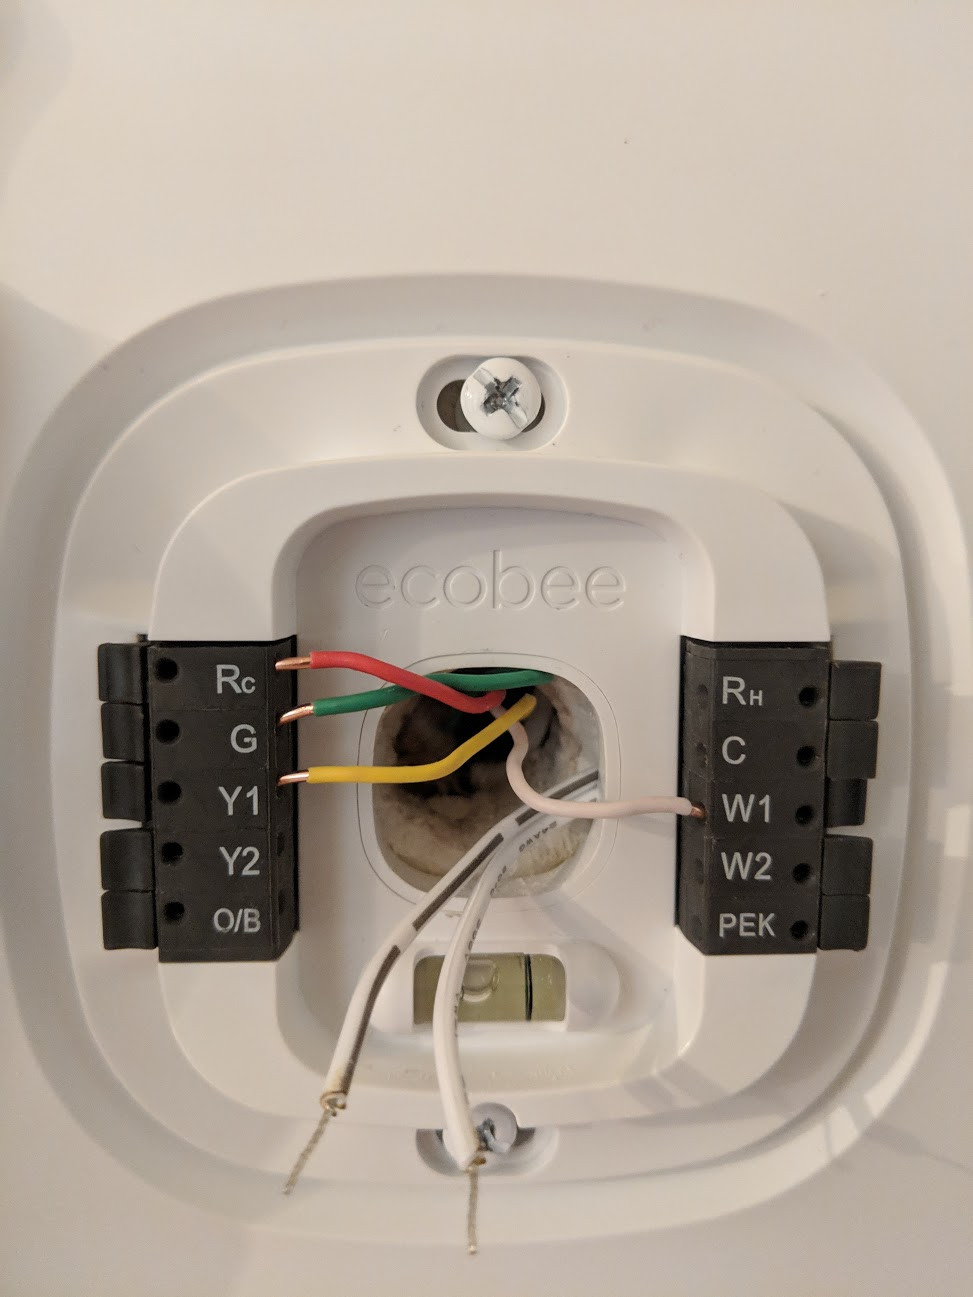 installing the ecobee 3 lite with an external 24v